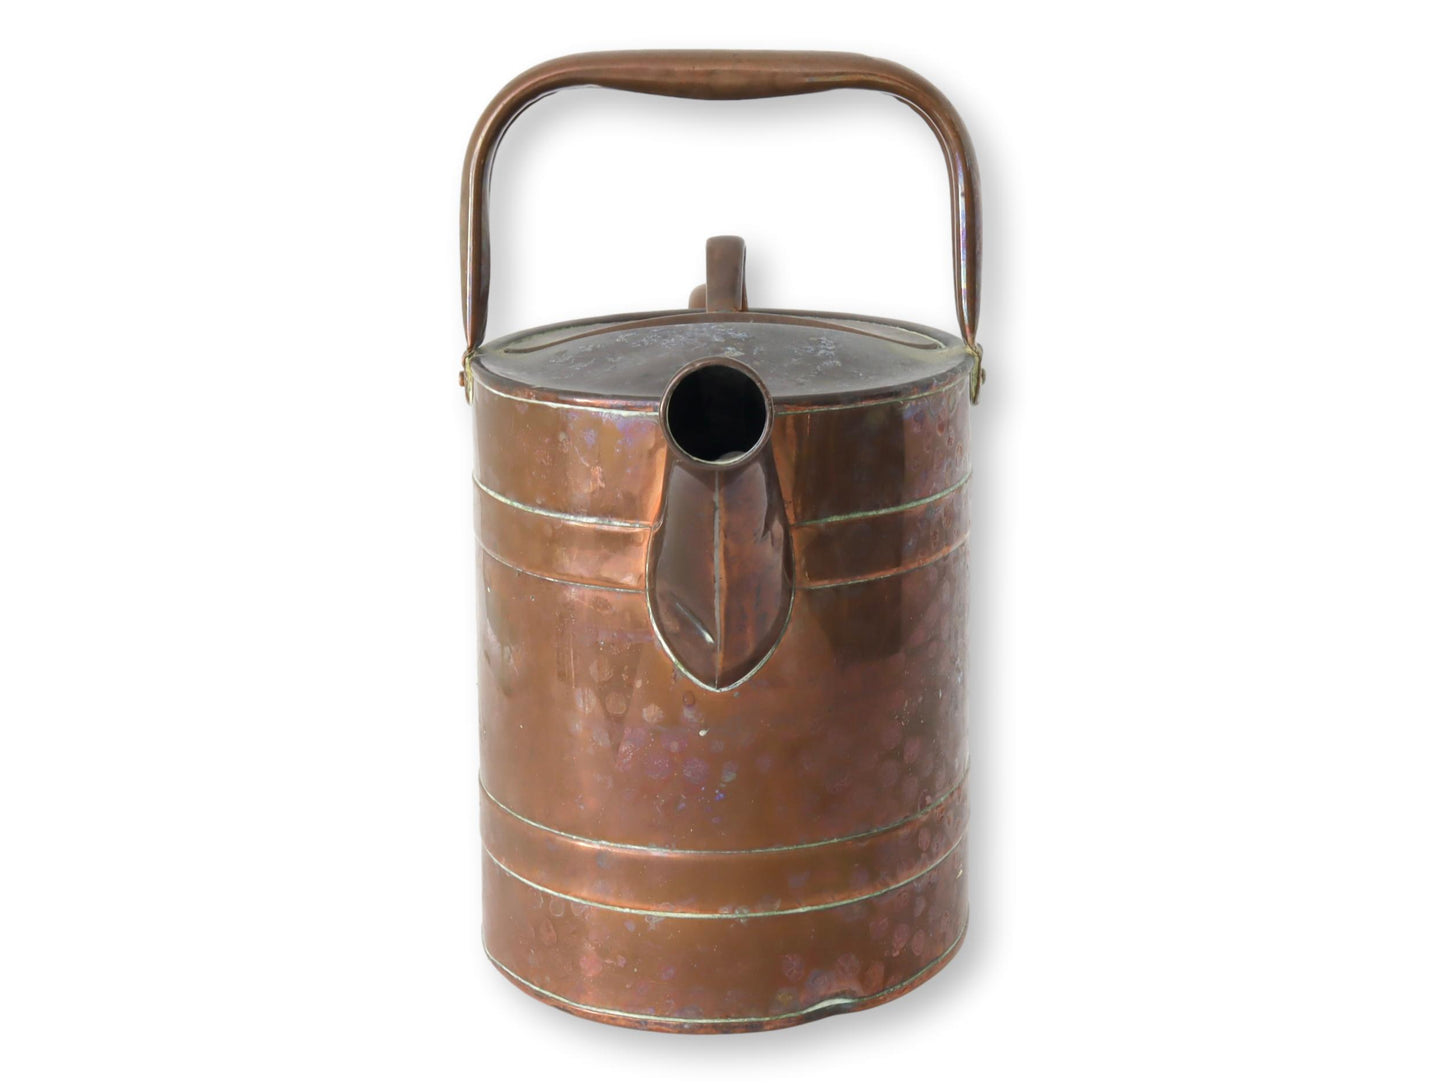 Antique English Copper Watering Can